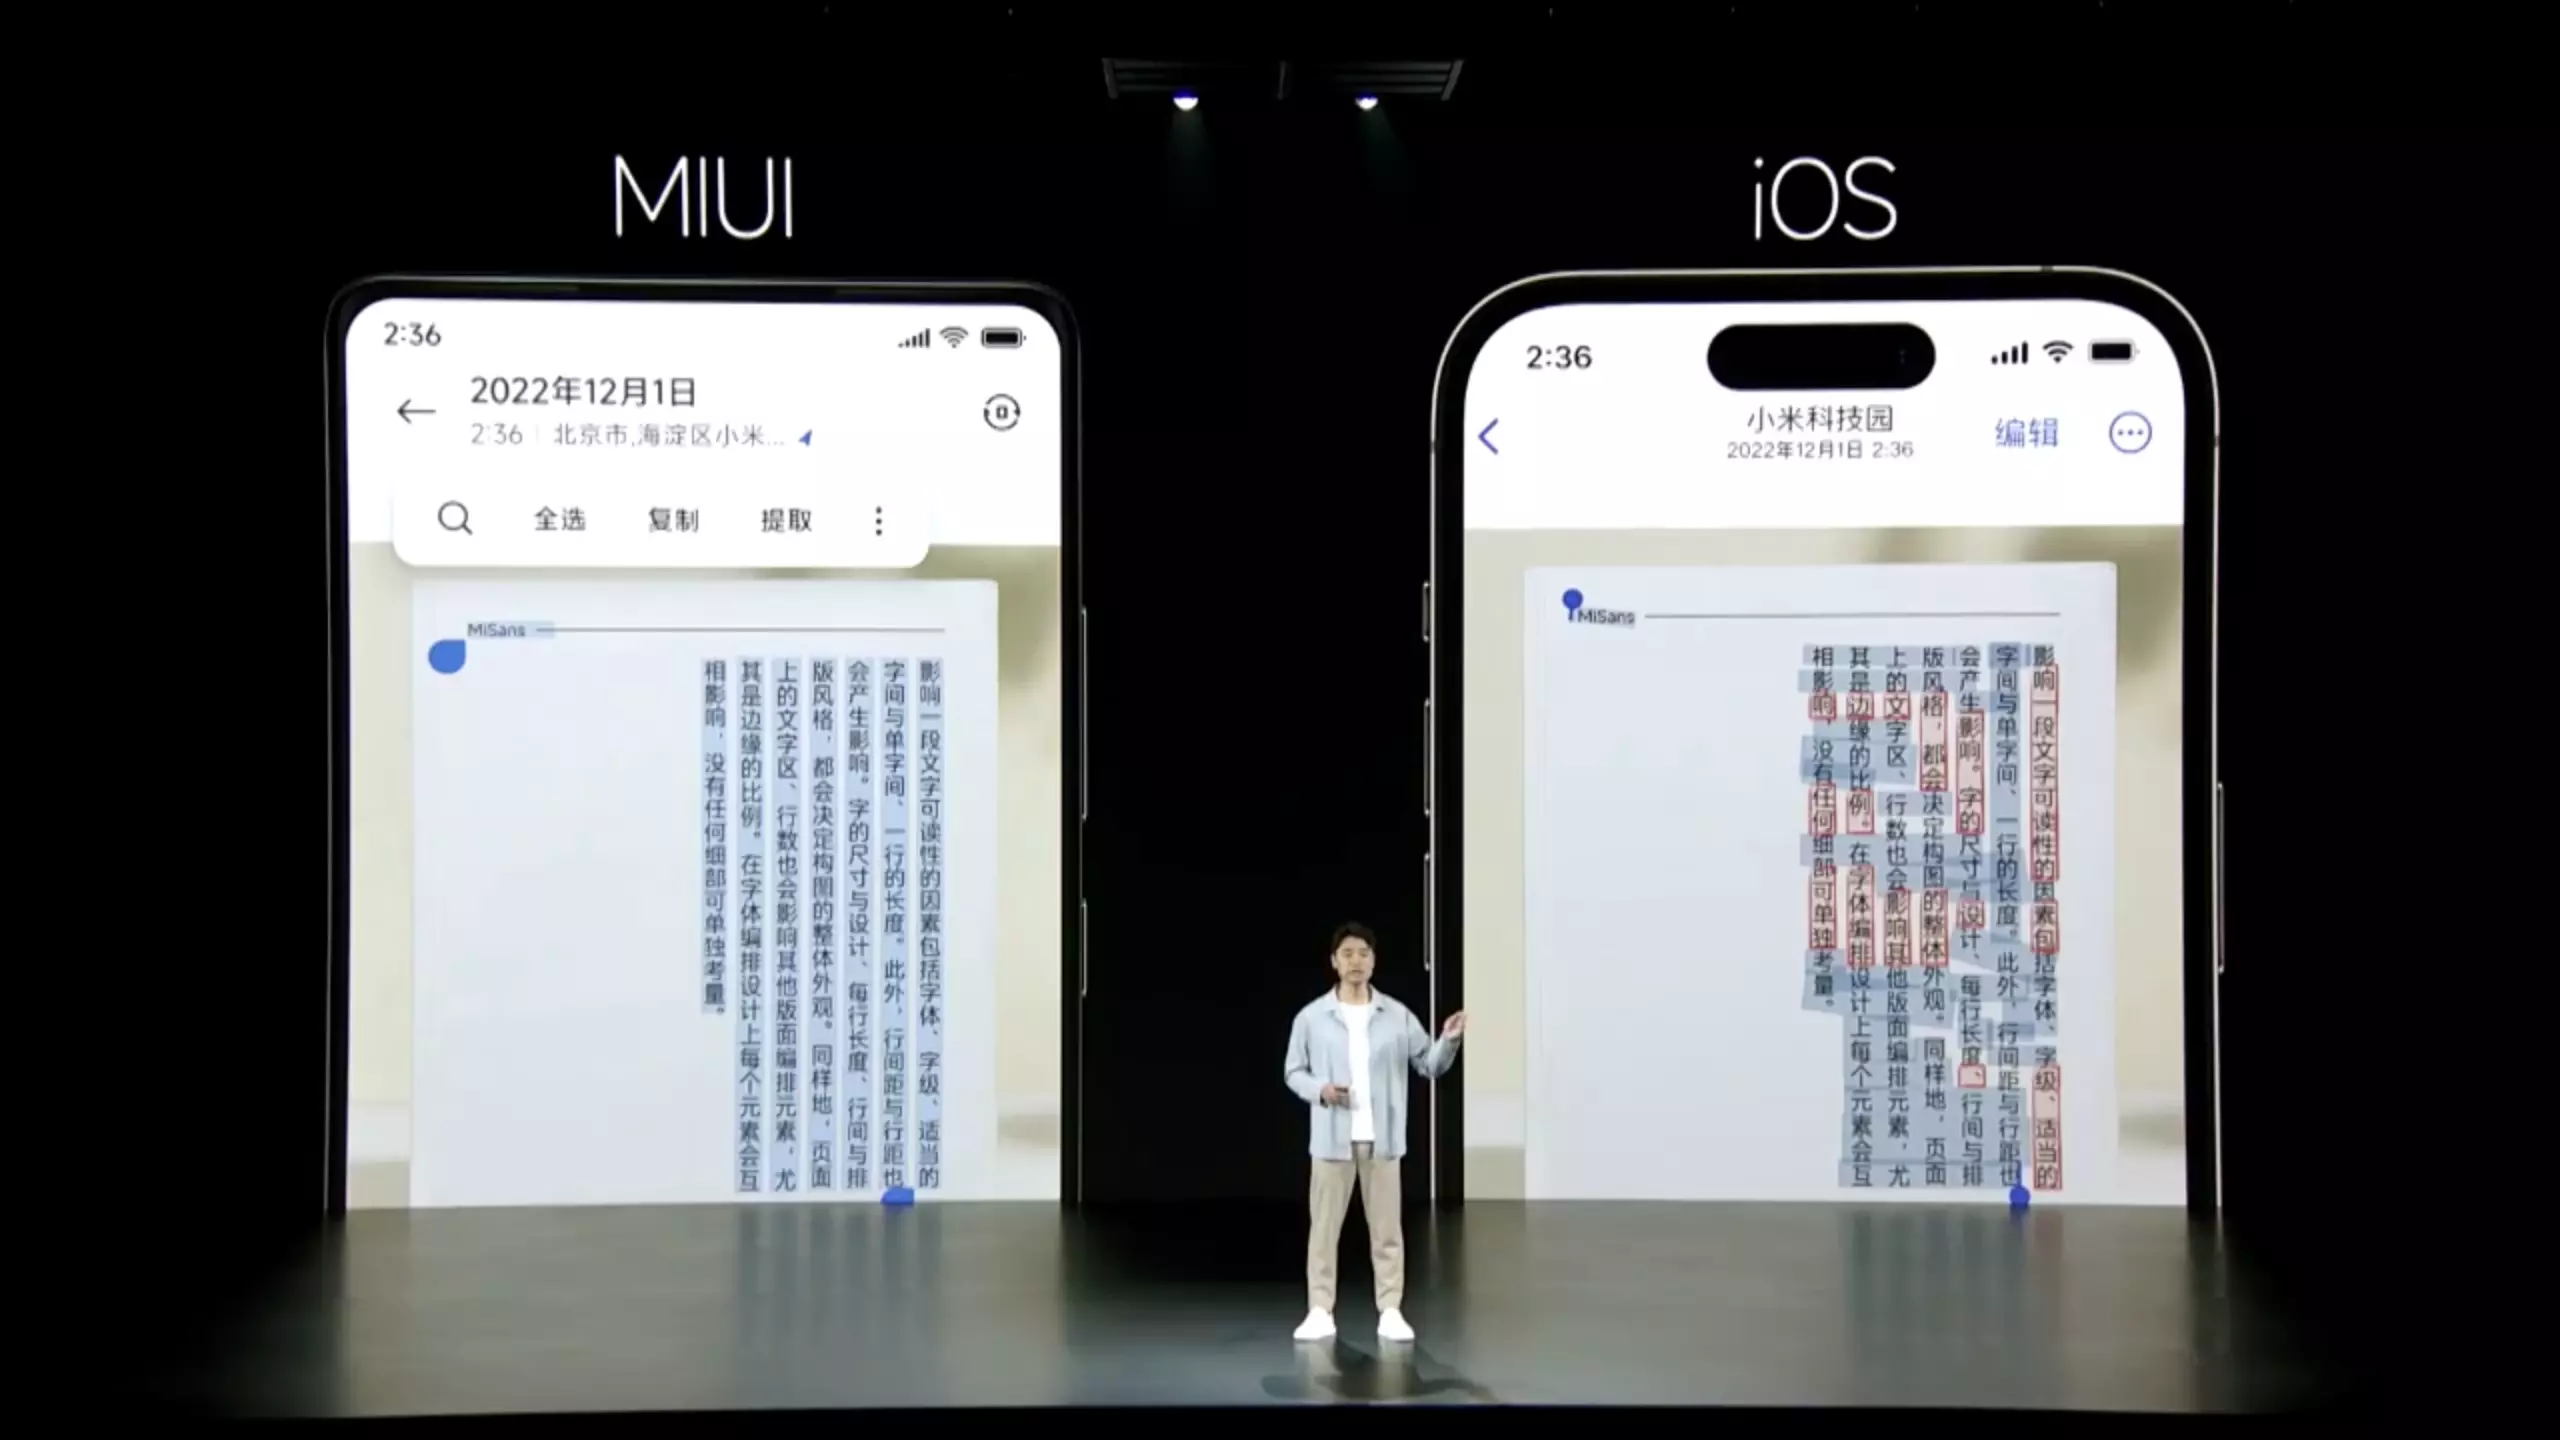 MIUI 14 Text with image